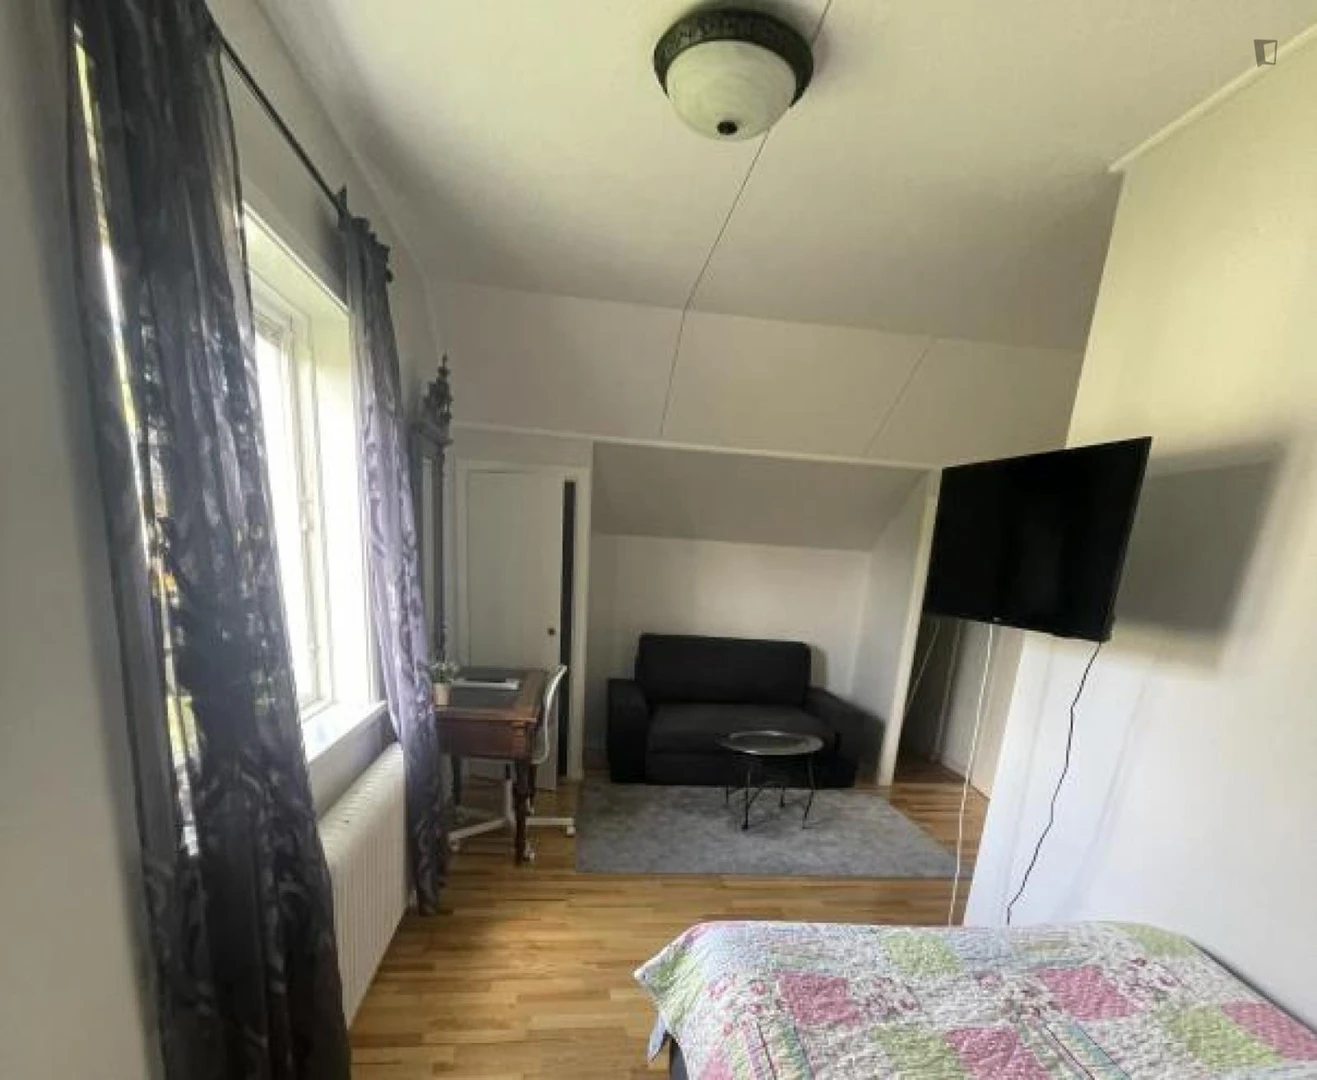 Renting rooms by the month in uppsala